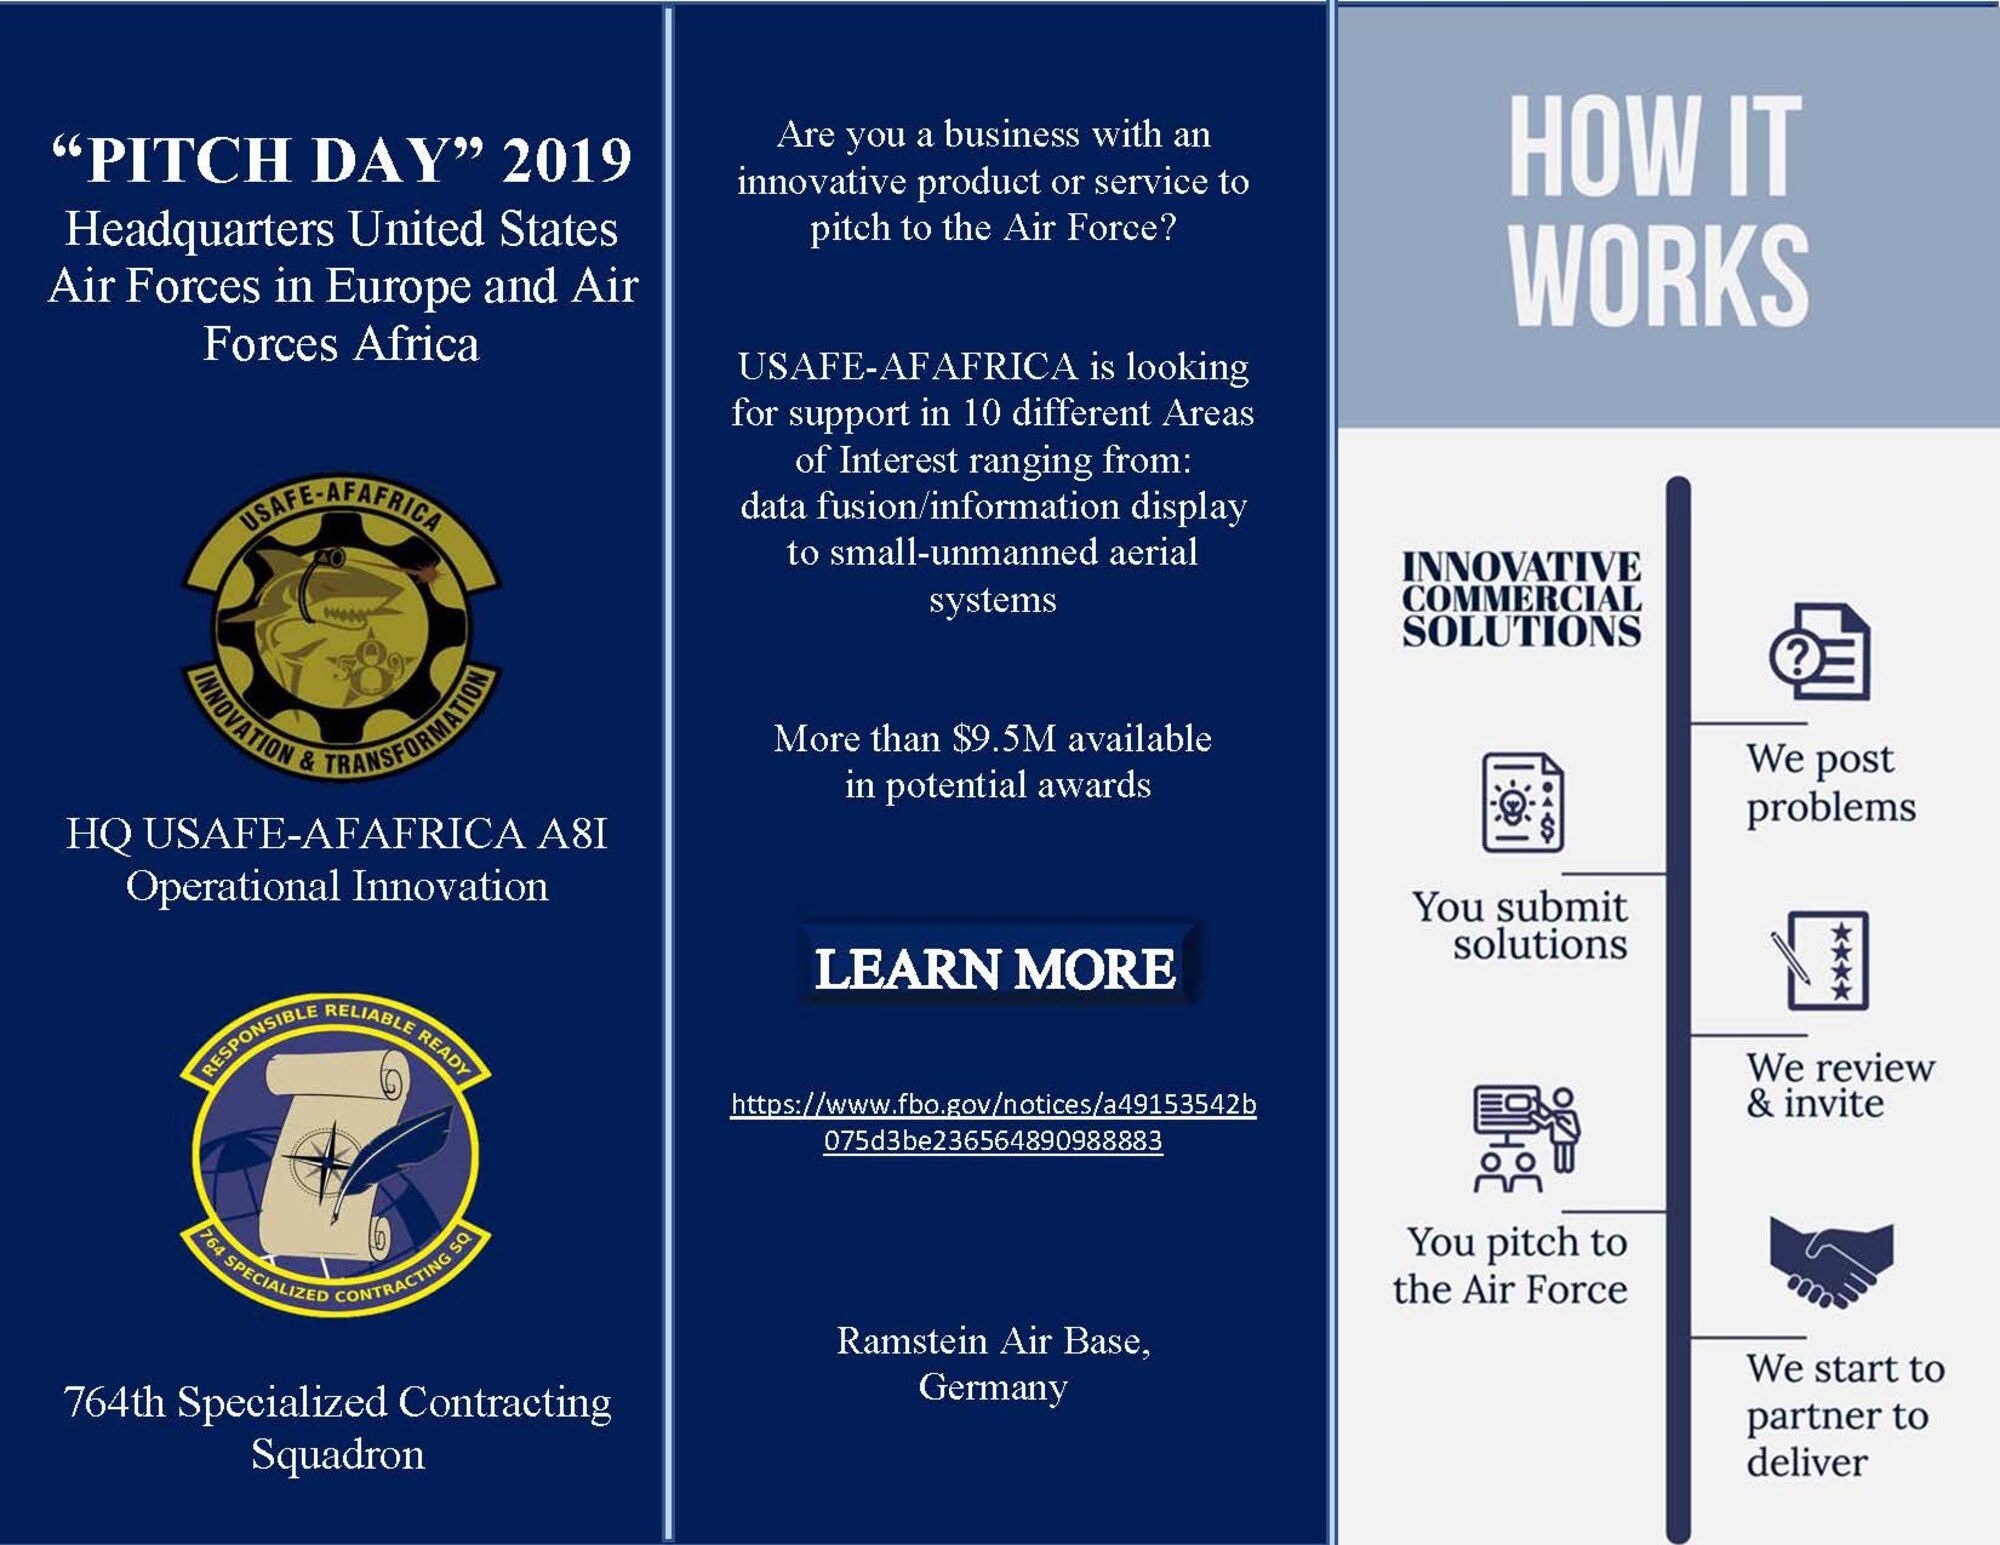 USAFE - AFAFRICA hosts Pitch Day